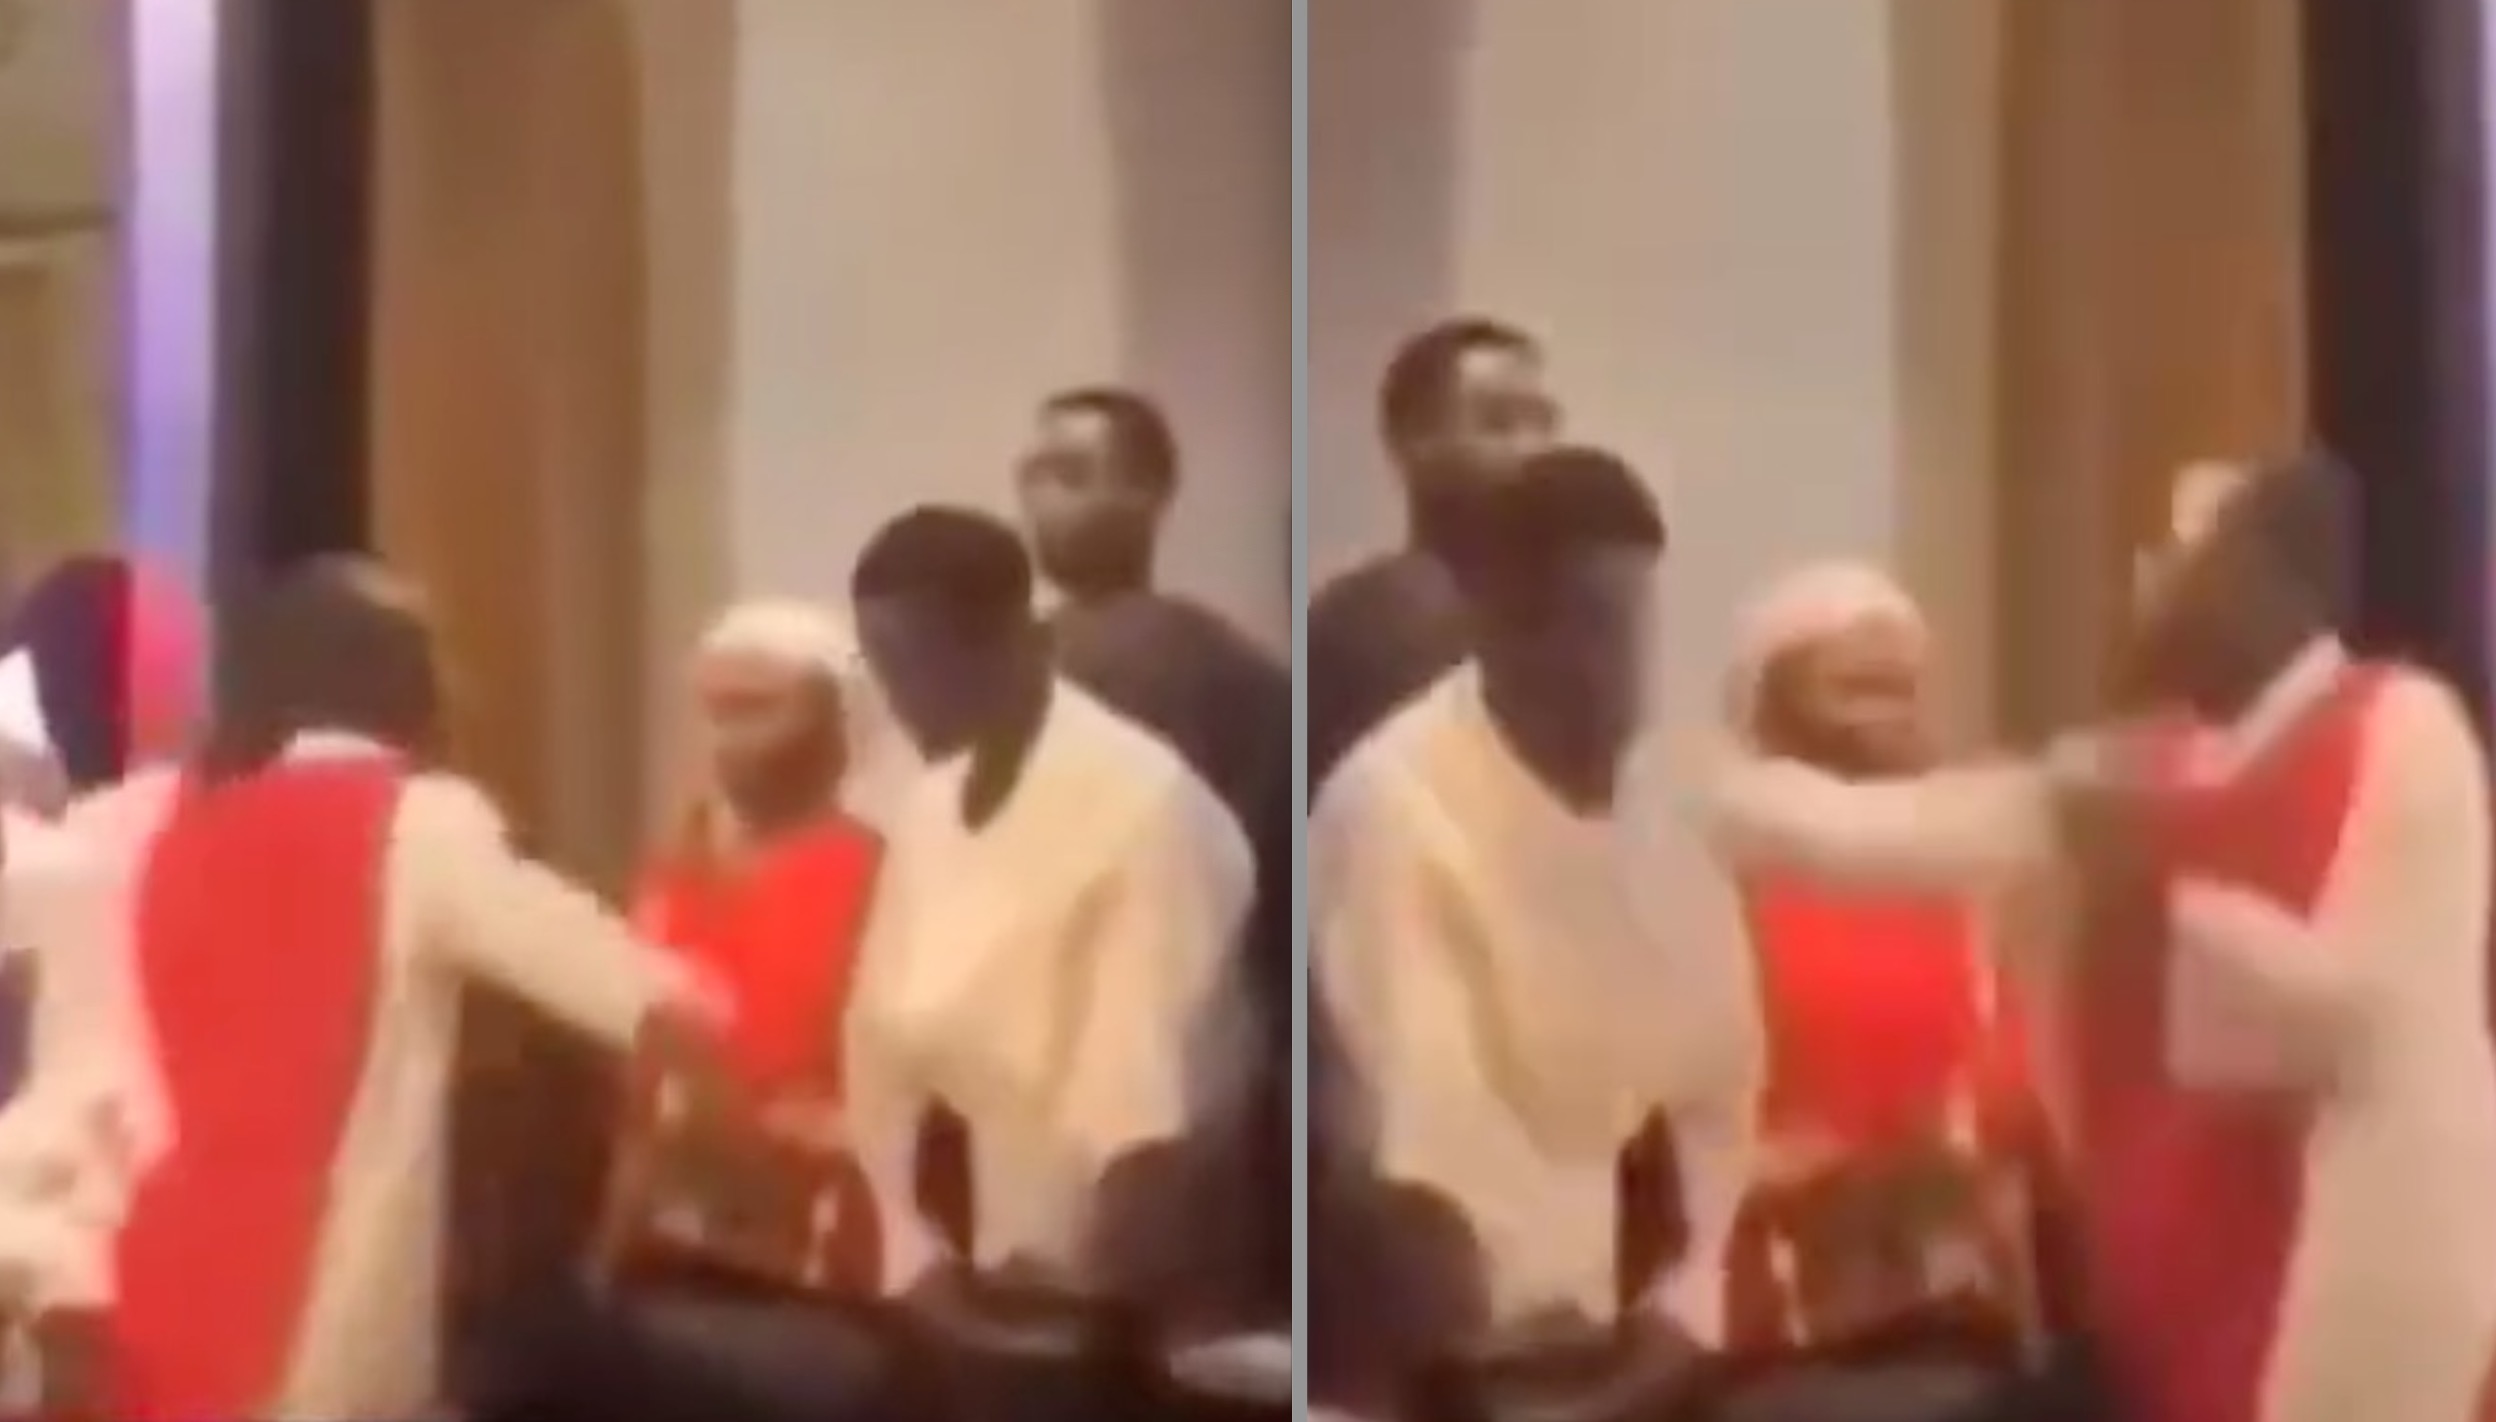 WATCH: Man Viciously Slaps Another in The Face in Church